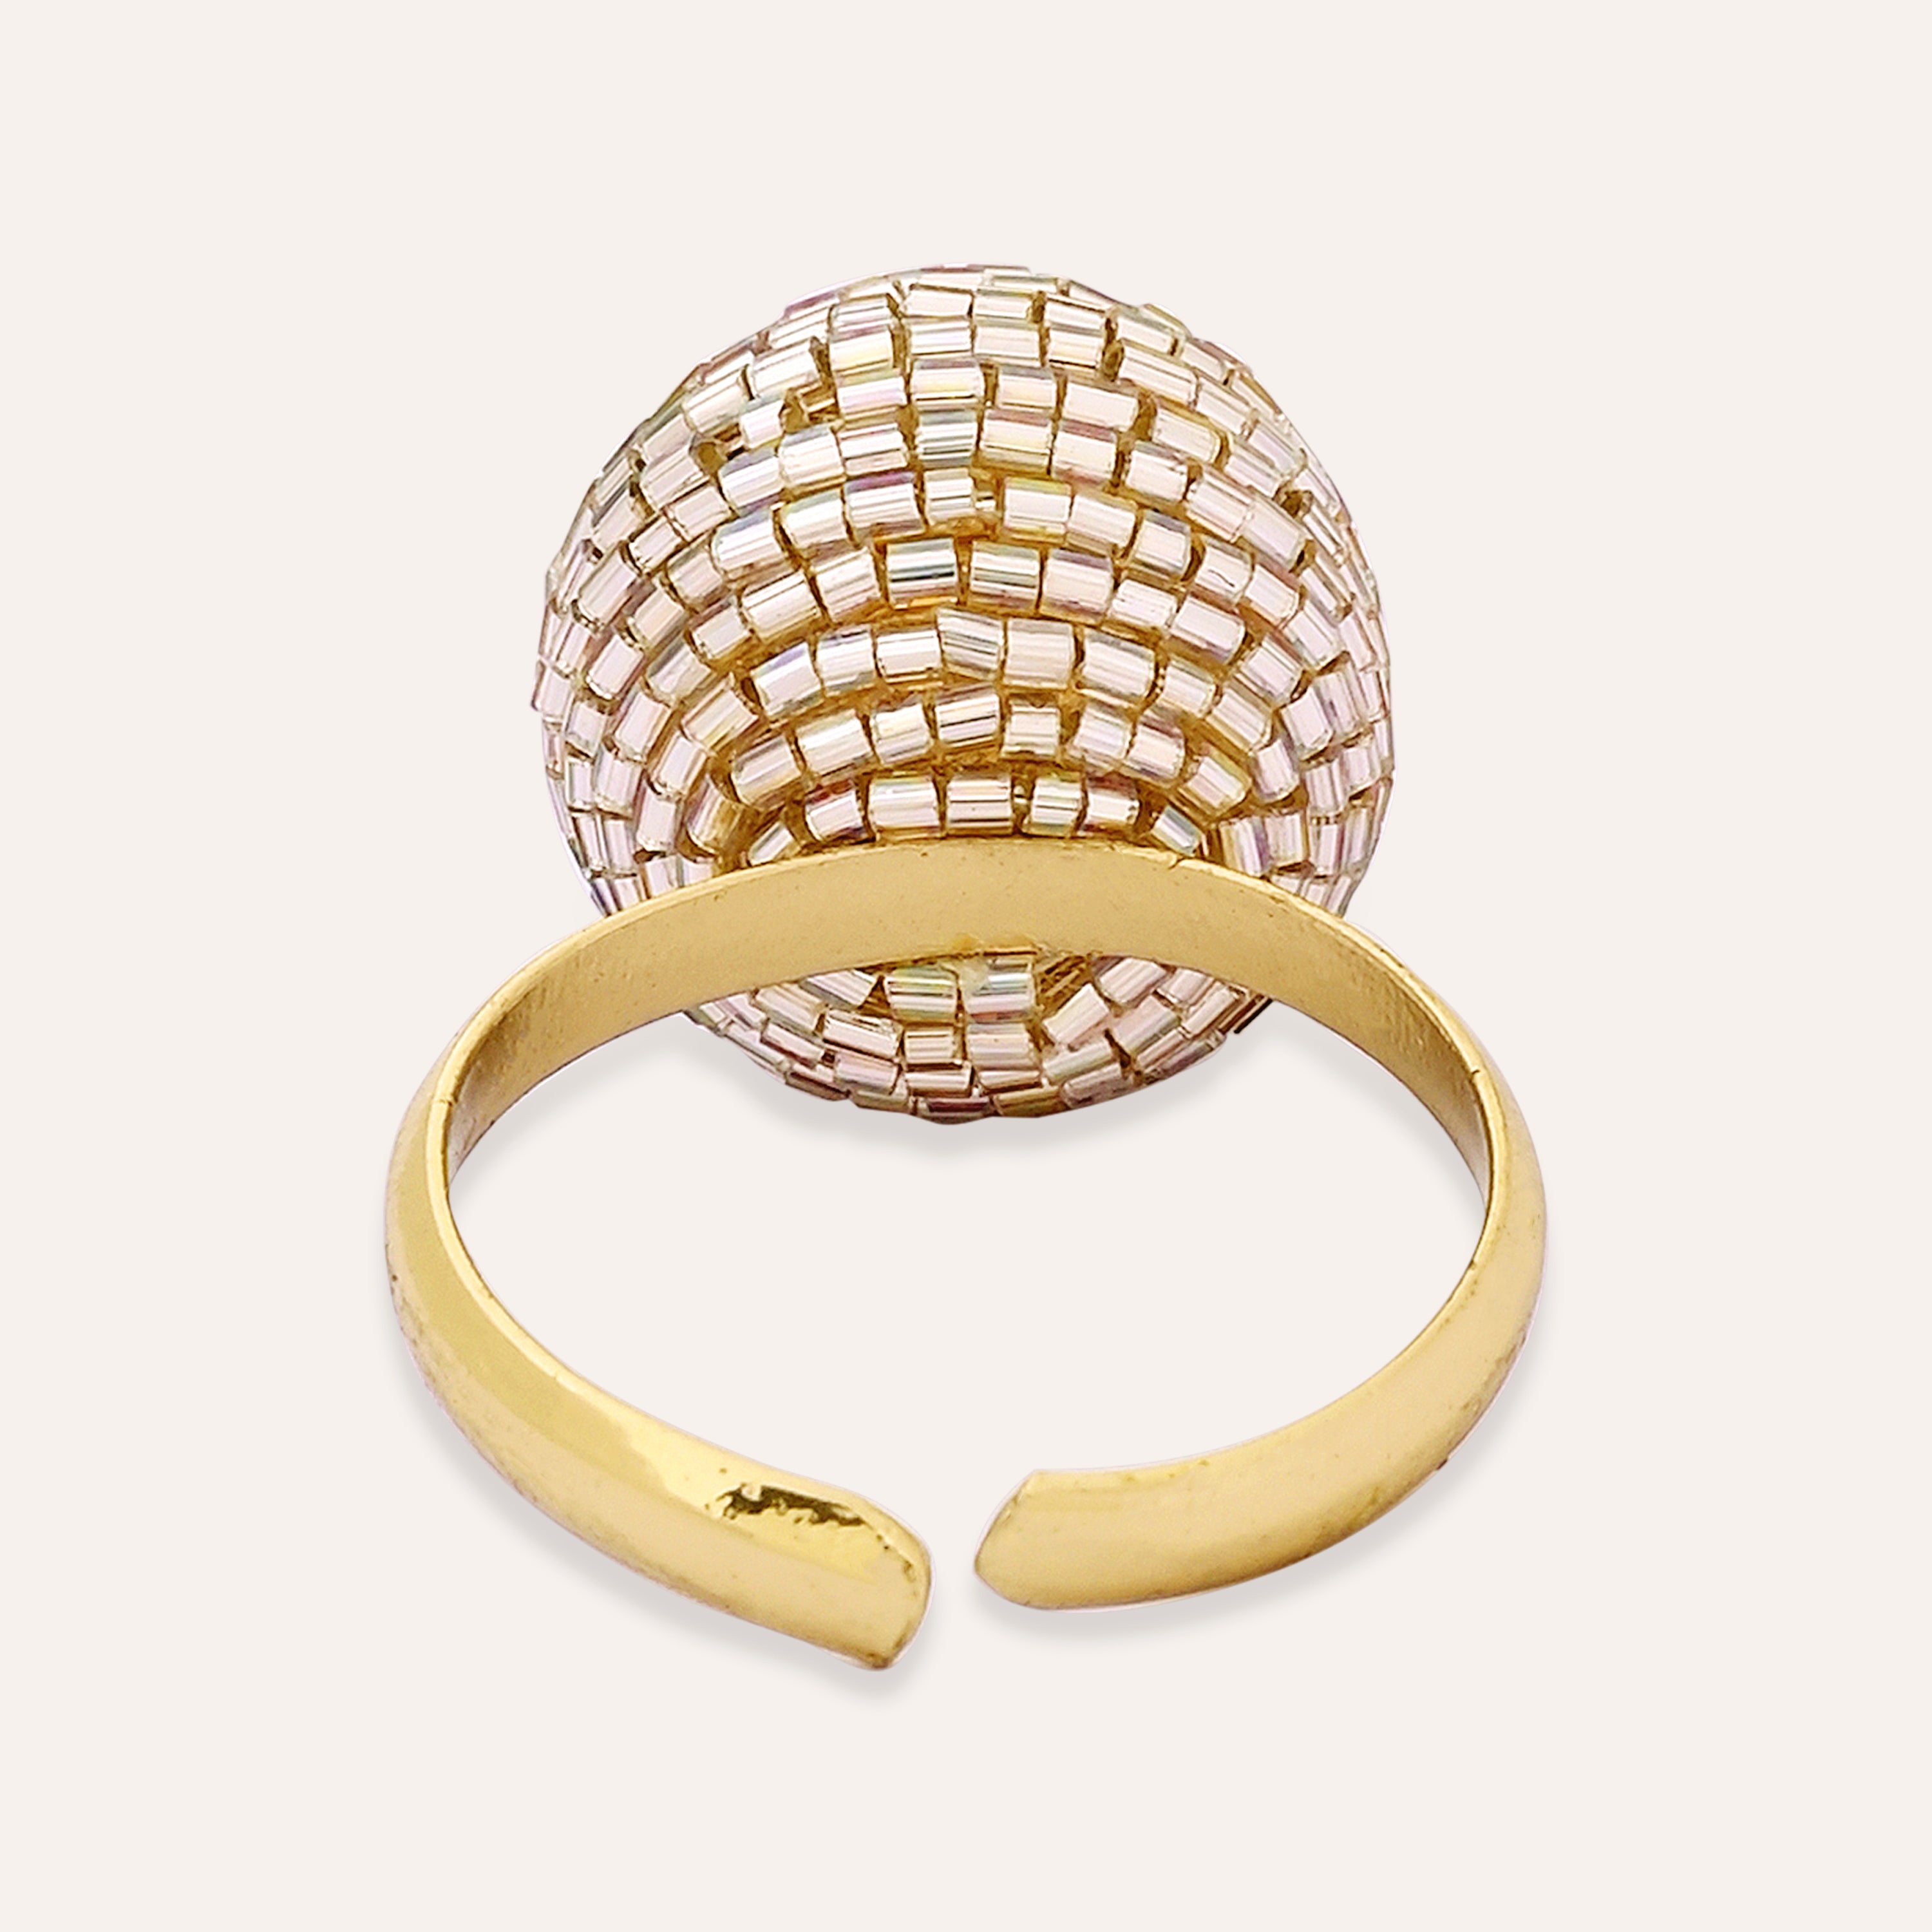 TFC Festive stunner gold statement ring- Elevate your style with our exquisite collection of gold-plated adjustable rings for women, including timeless signet rings. Explore cheapest fashion jewellery designs with anti-tarnish properties, all at The Fun Company with a touch of elegance